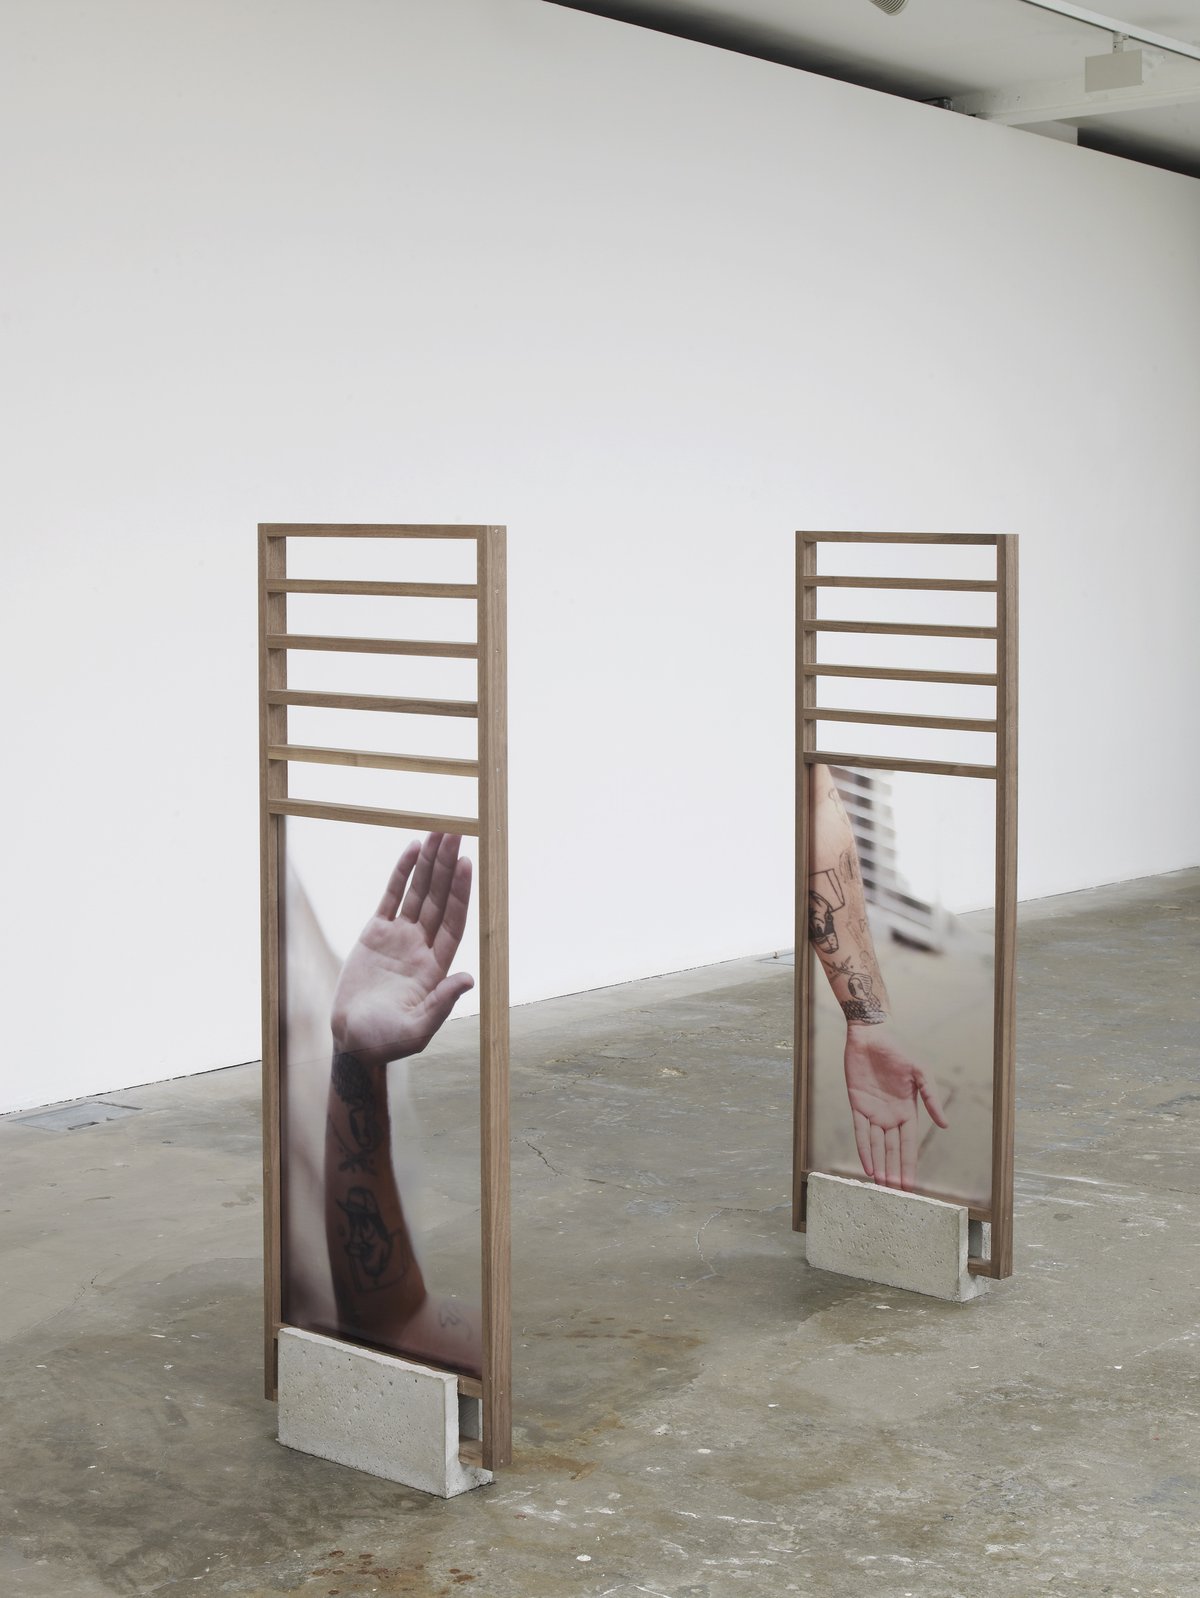 Philipp TimischlHigh 5 and Low 5 (recto), 2016Walnut frame, cement plinth, engraved metal label, UV-print on acrylic glass140 x 46 x 9 cm